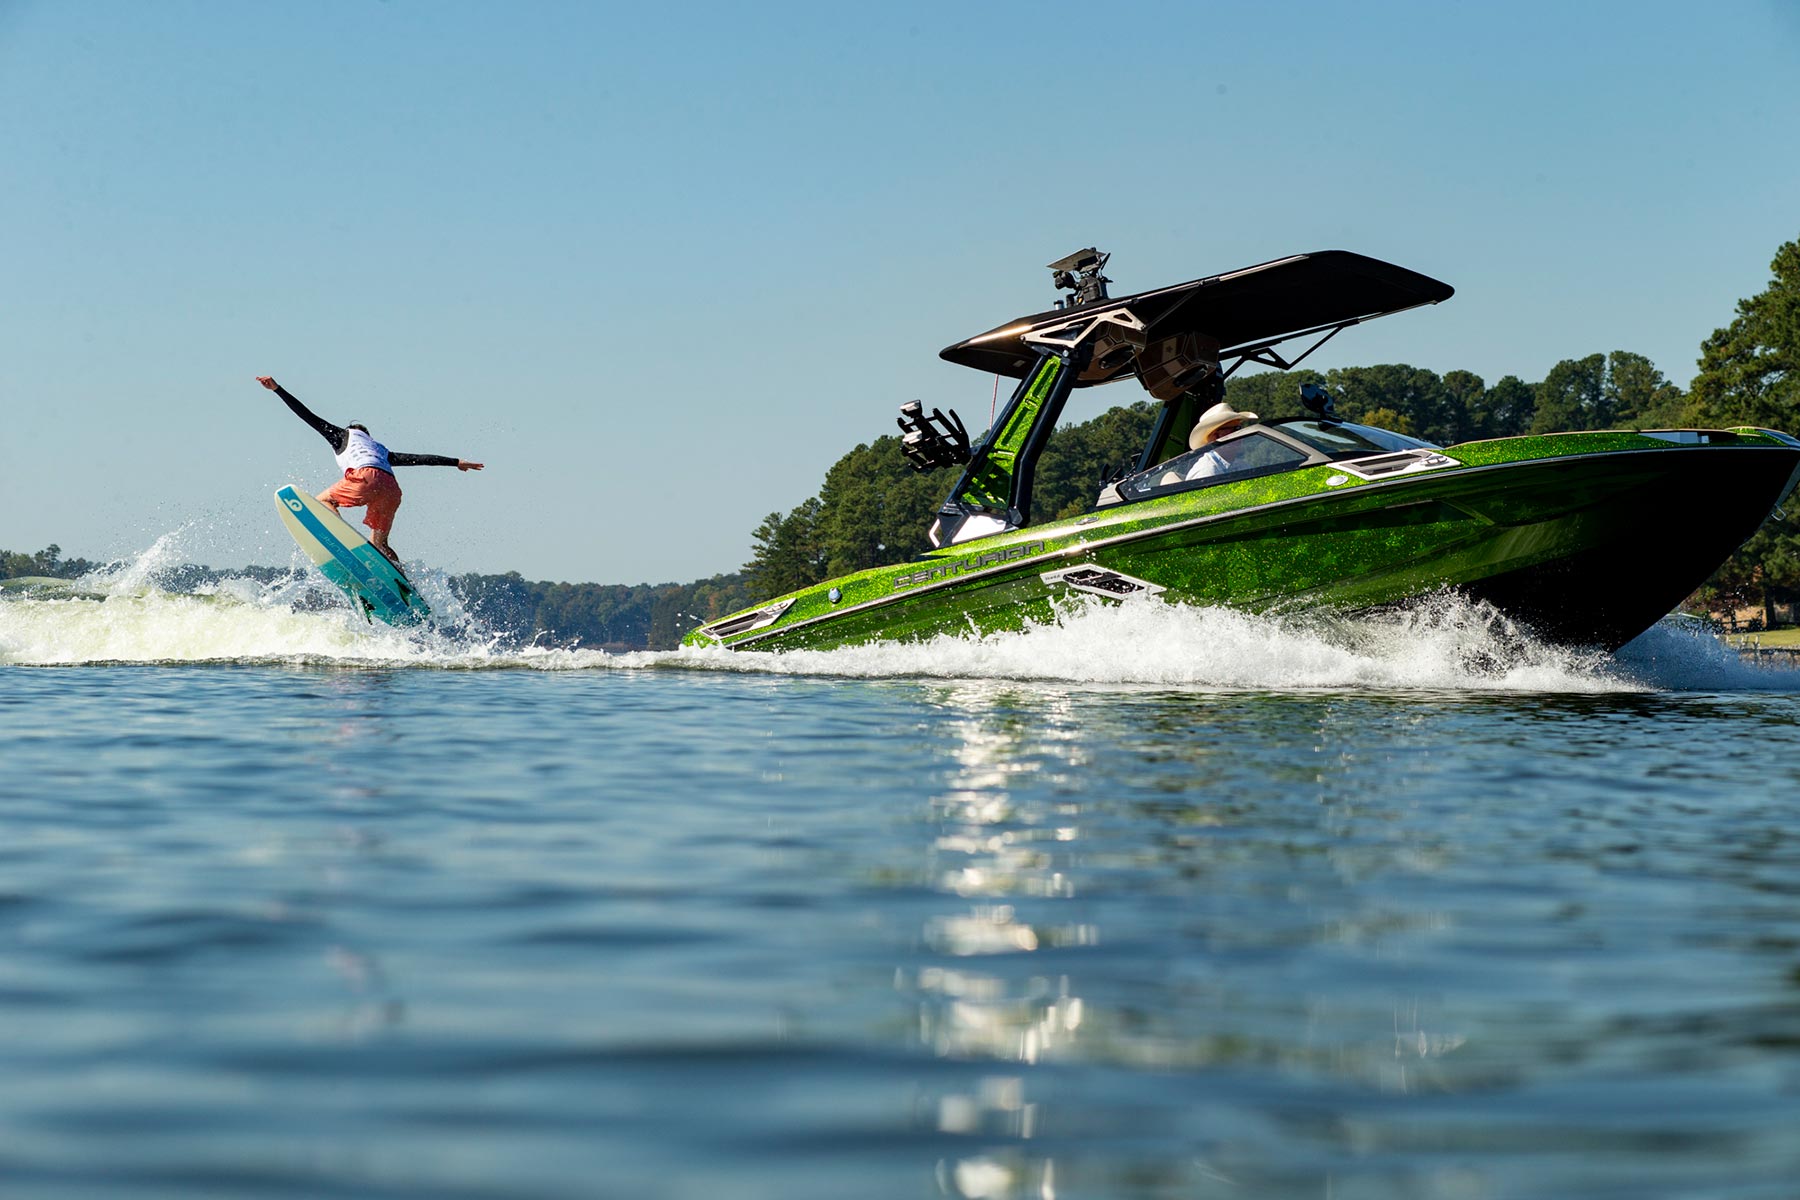 A competitor is riding a wakeboard on a green boat in an intense contest.